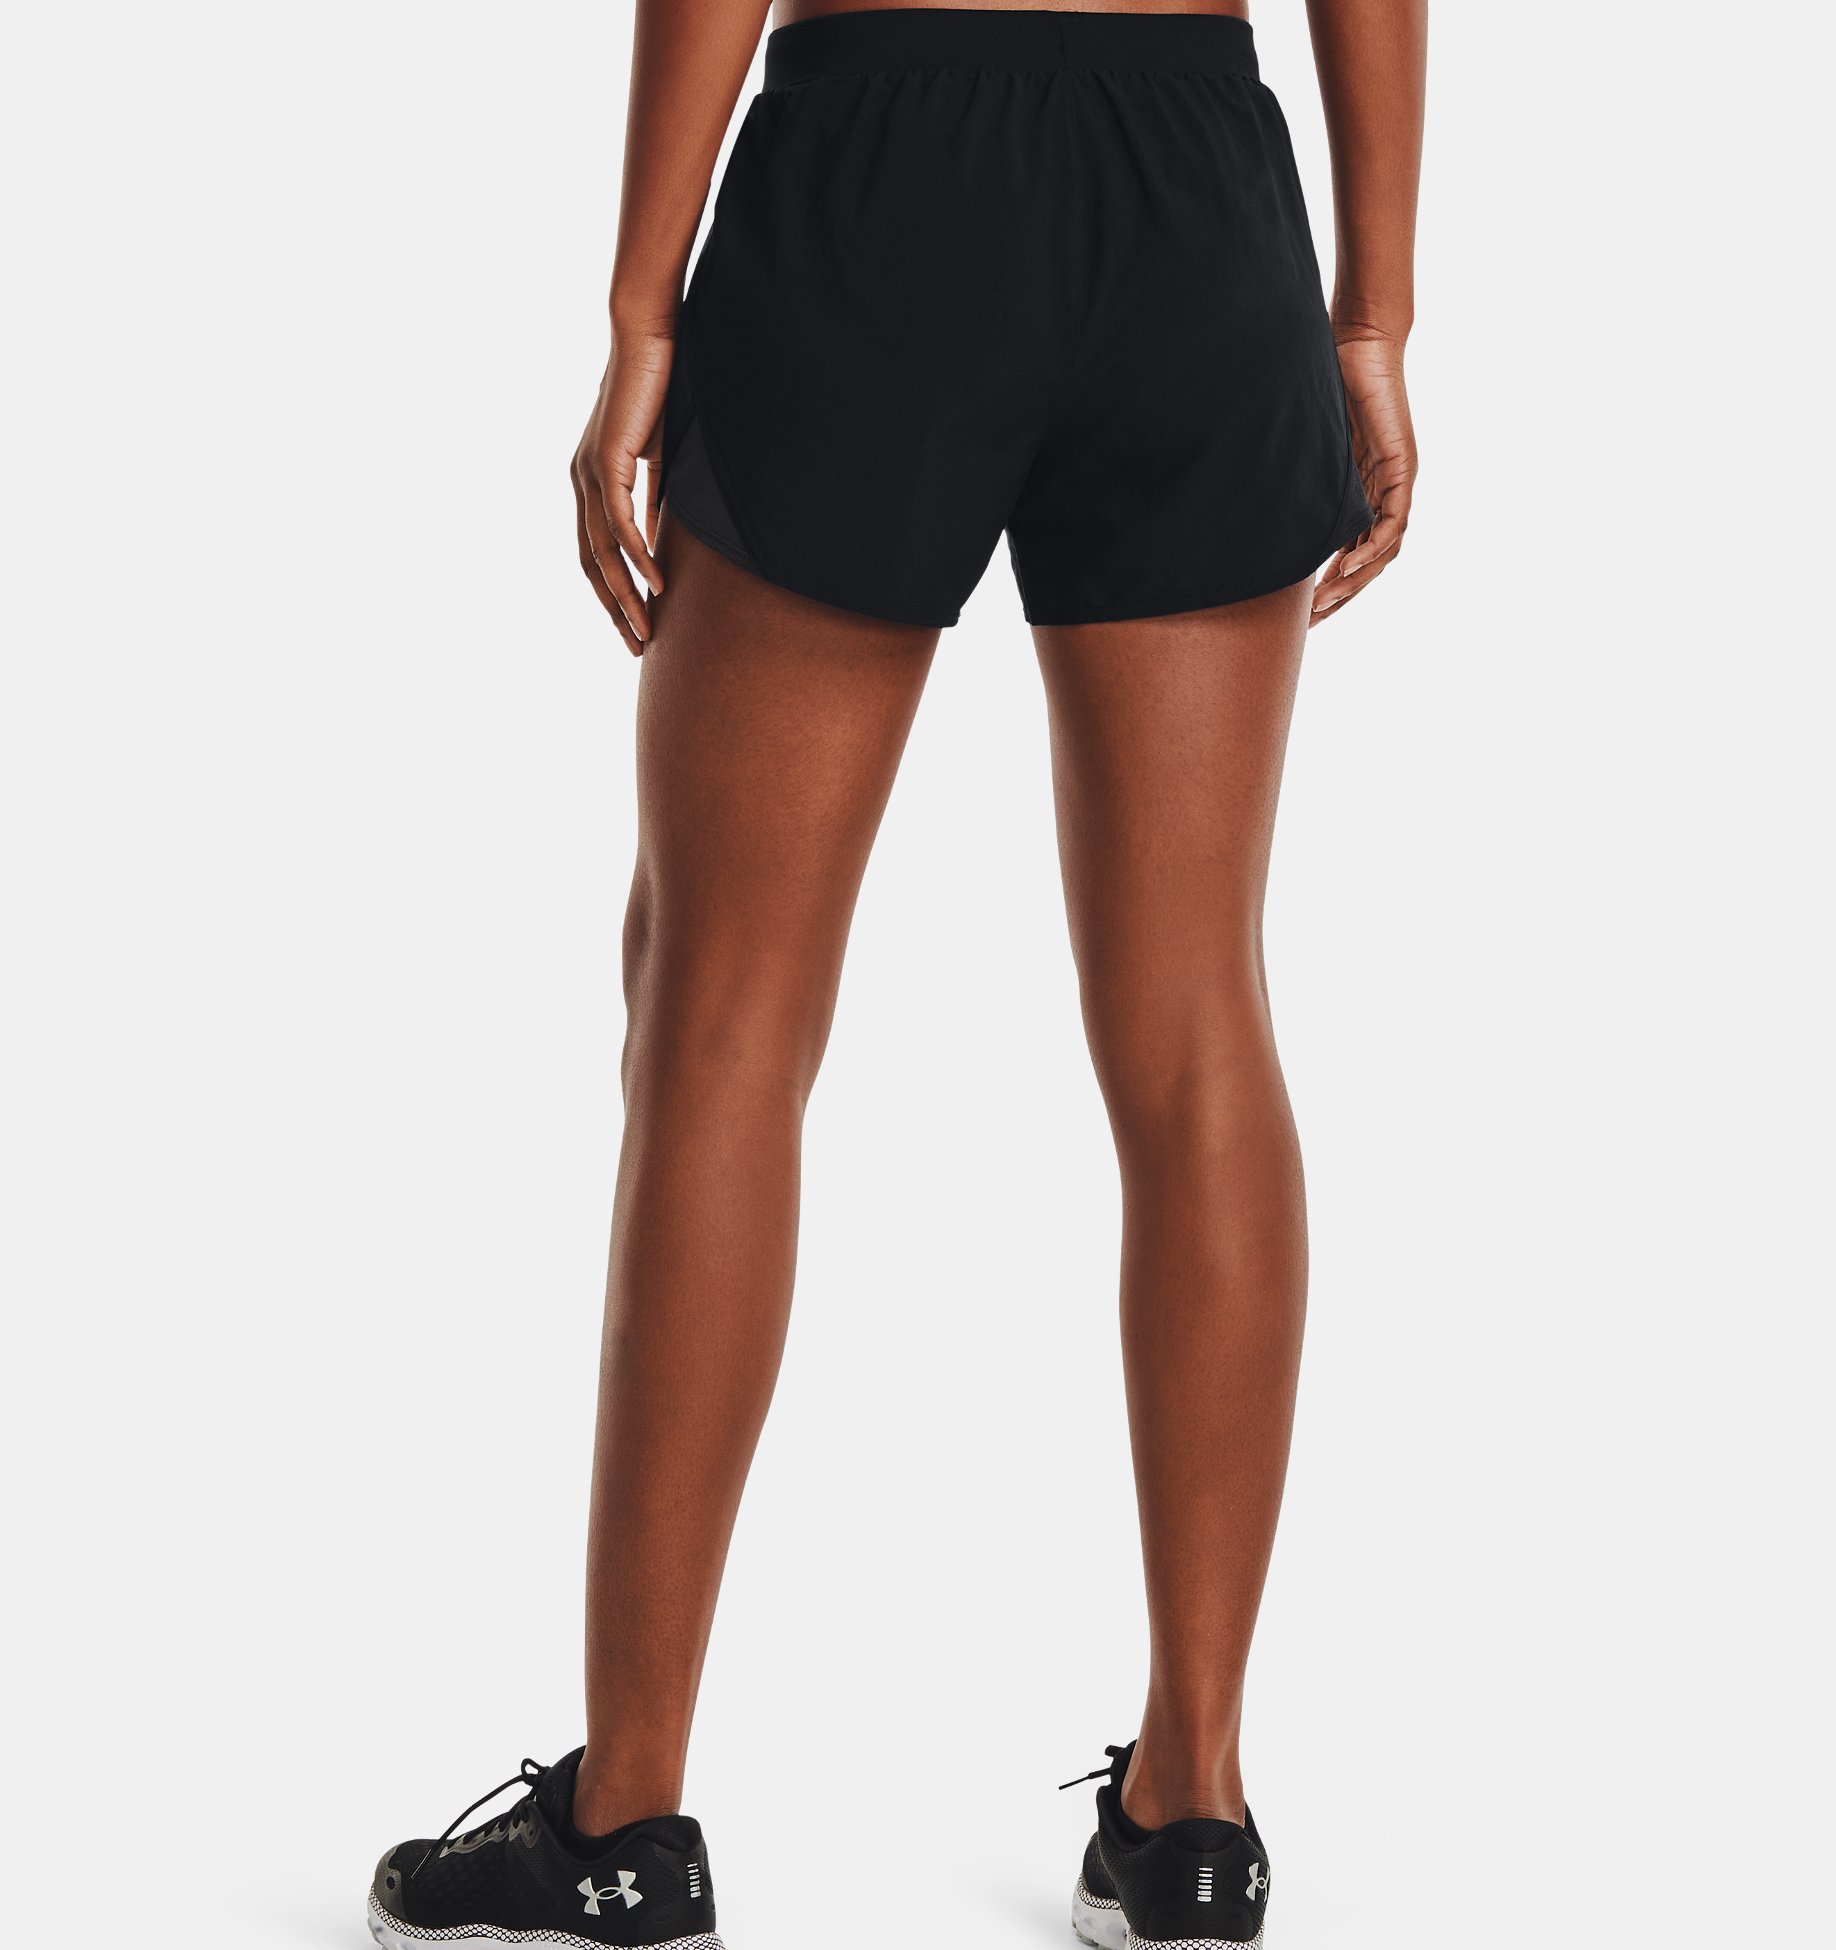 Fly by 2.0 Pantalon de Course Shorts Under Armour Fly by 2.0 Running Short Femme 